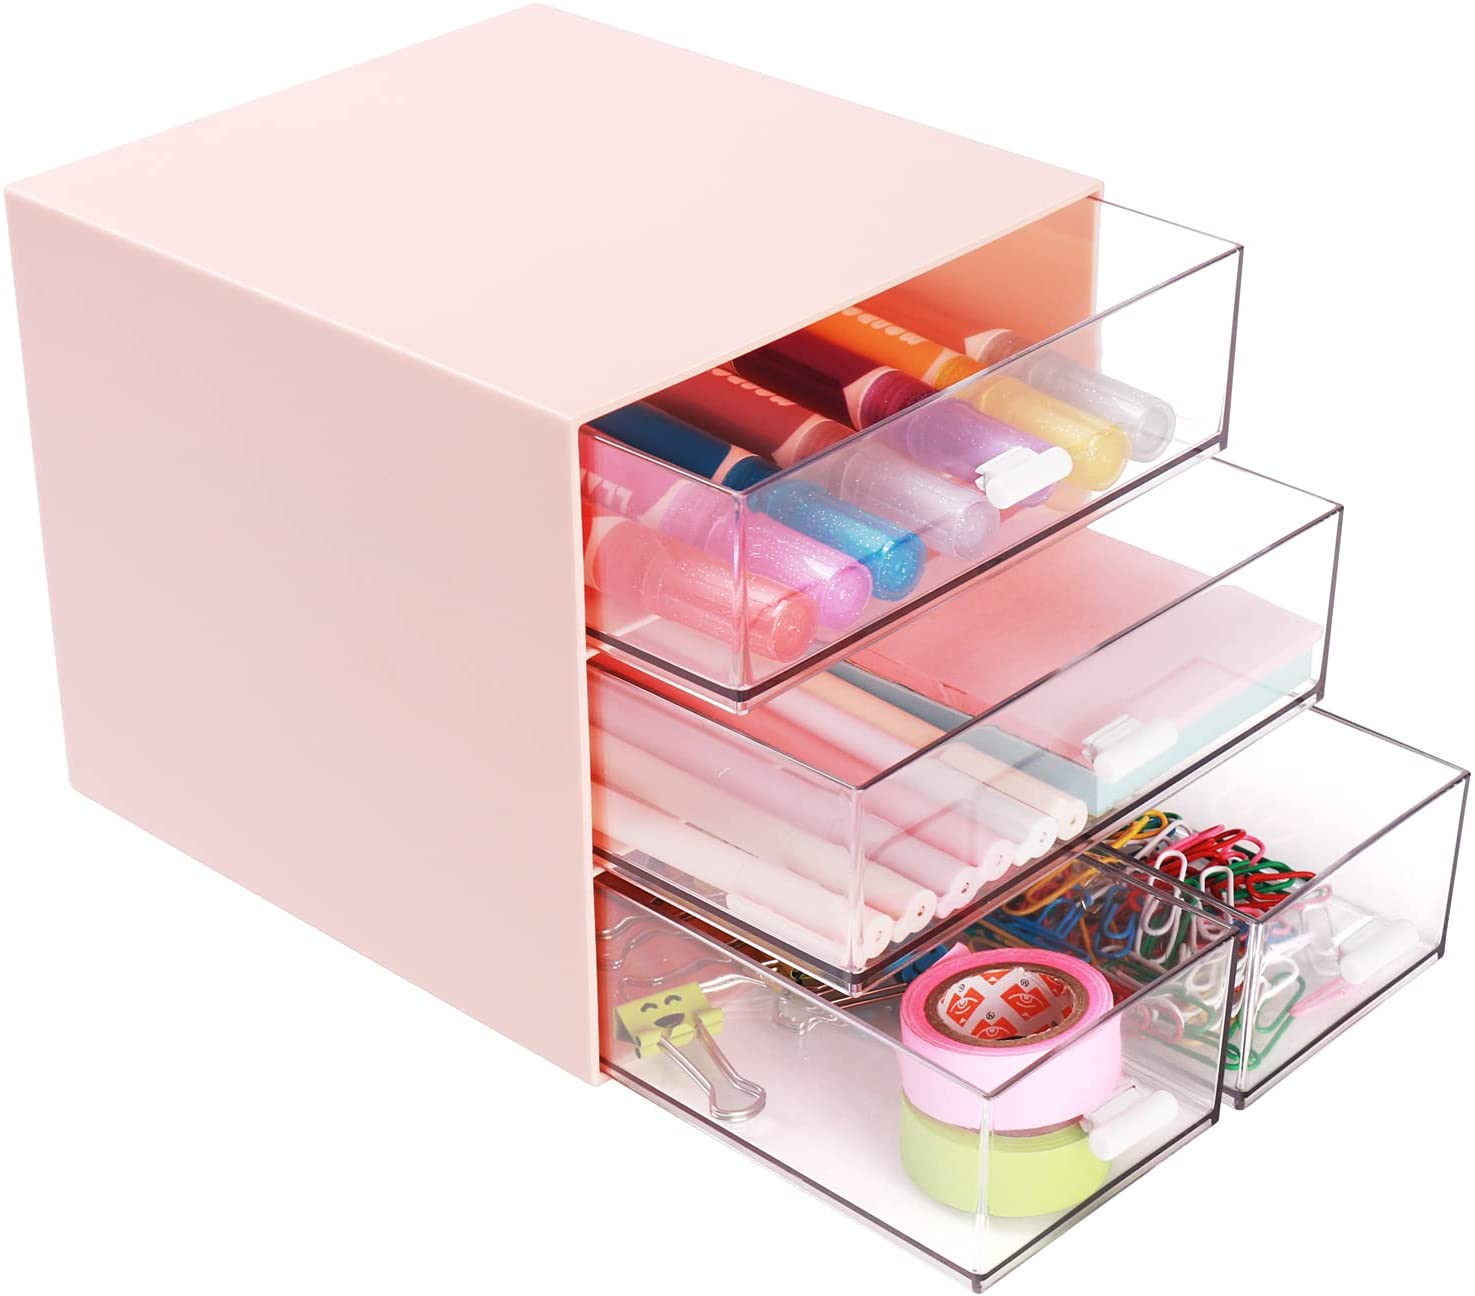 Comix Plastic Desk Organizer with 4 Drawers for Office School Home